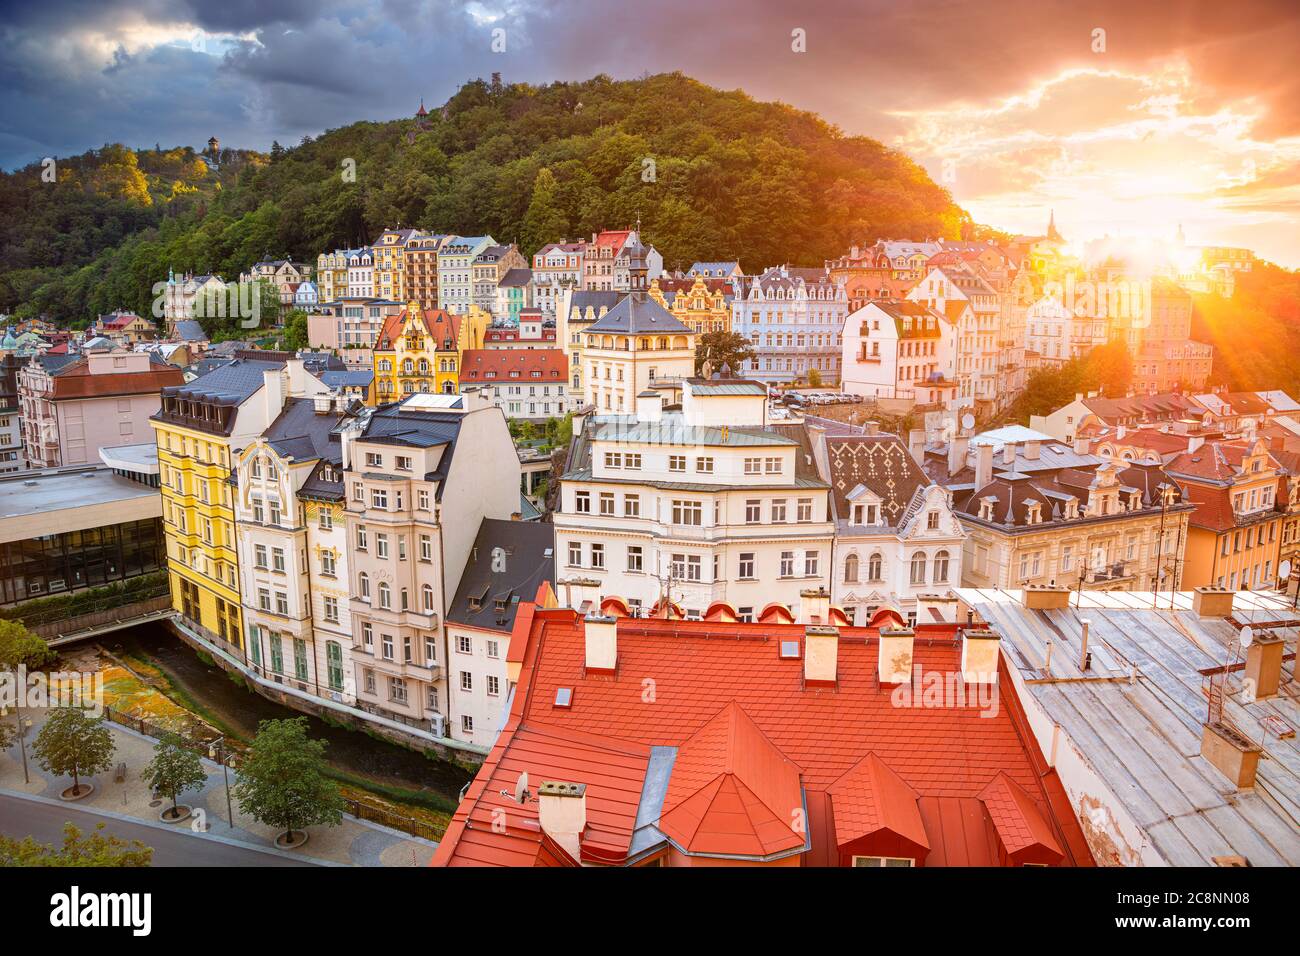 Karlovy Vary, Czech Republic. Aerial image of Karlovy Vary (Carlsbad), located in western Bohemia at beautiful sunset. Stock Photo